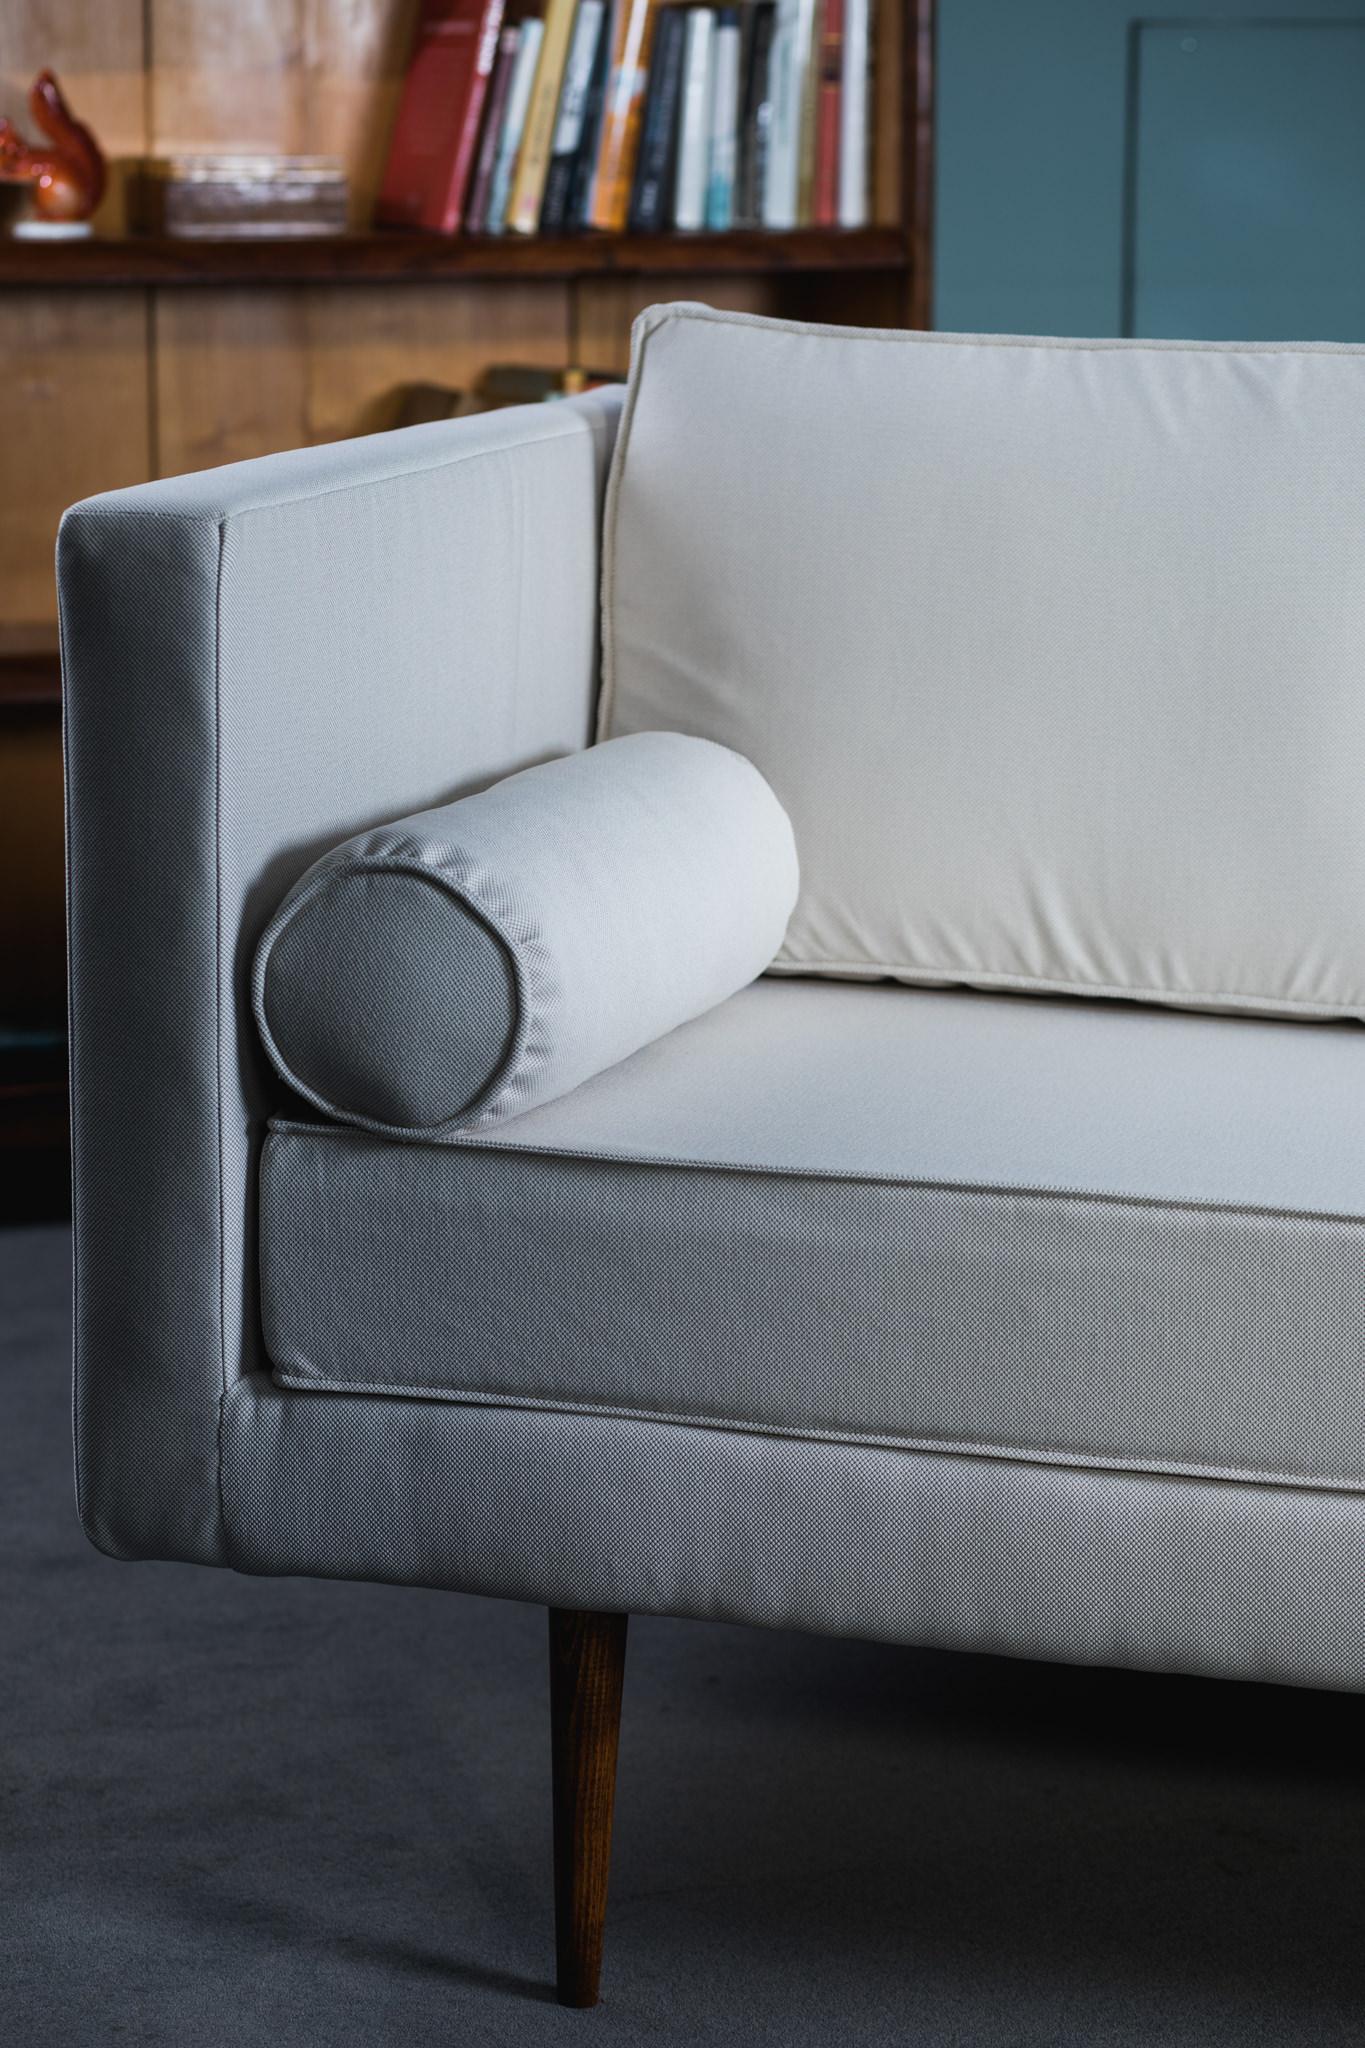 Elegant furniture for modern interiors with soft and shiny upholstery. Brand new, available is different sizes if needed.